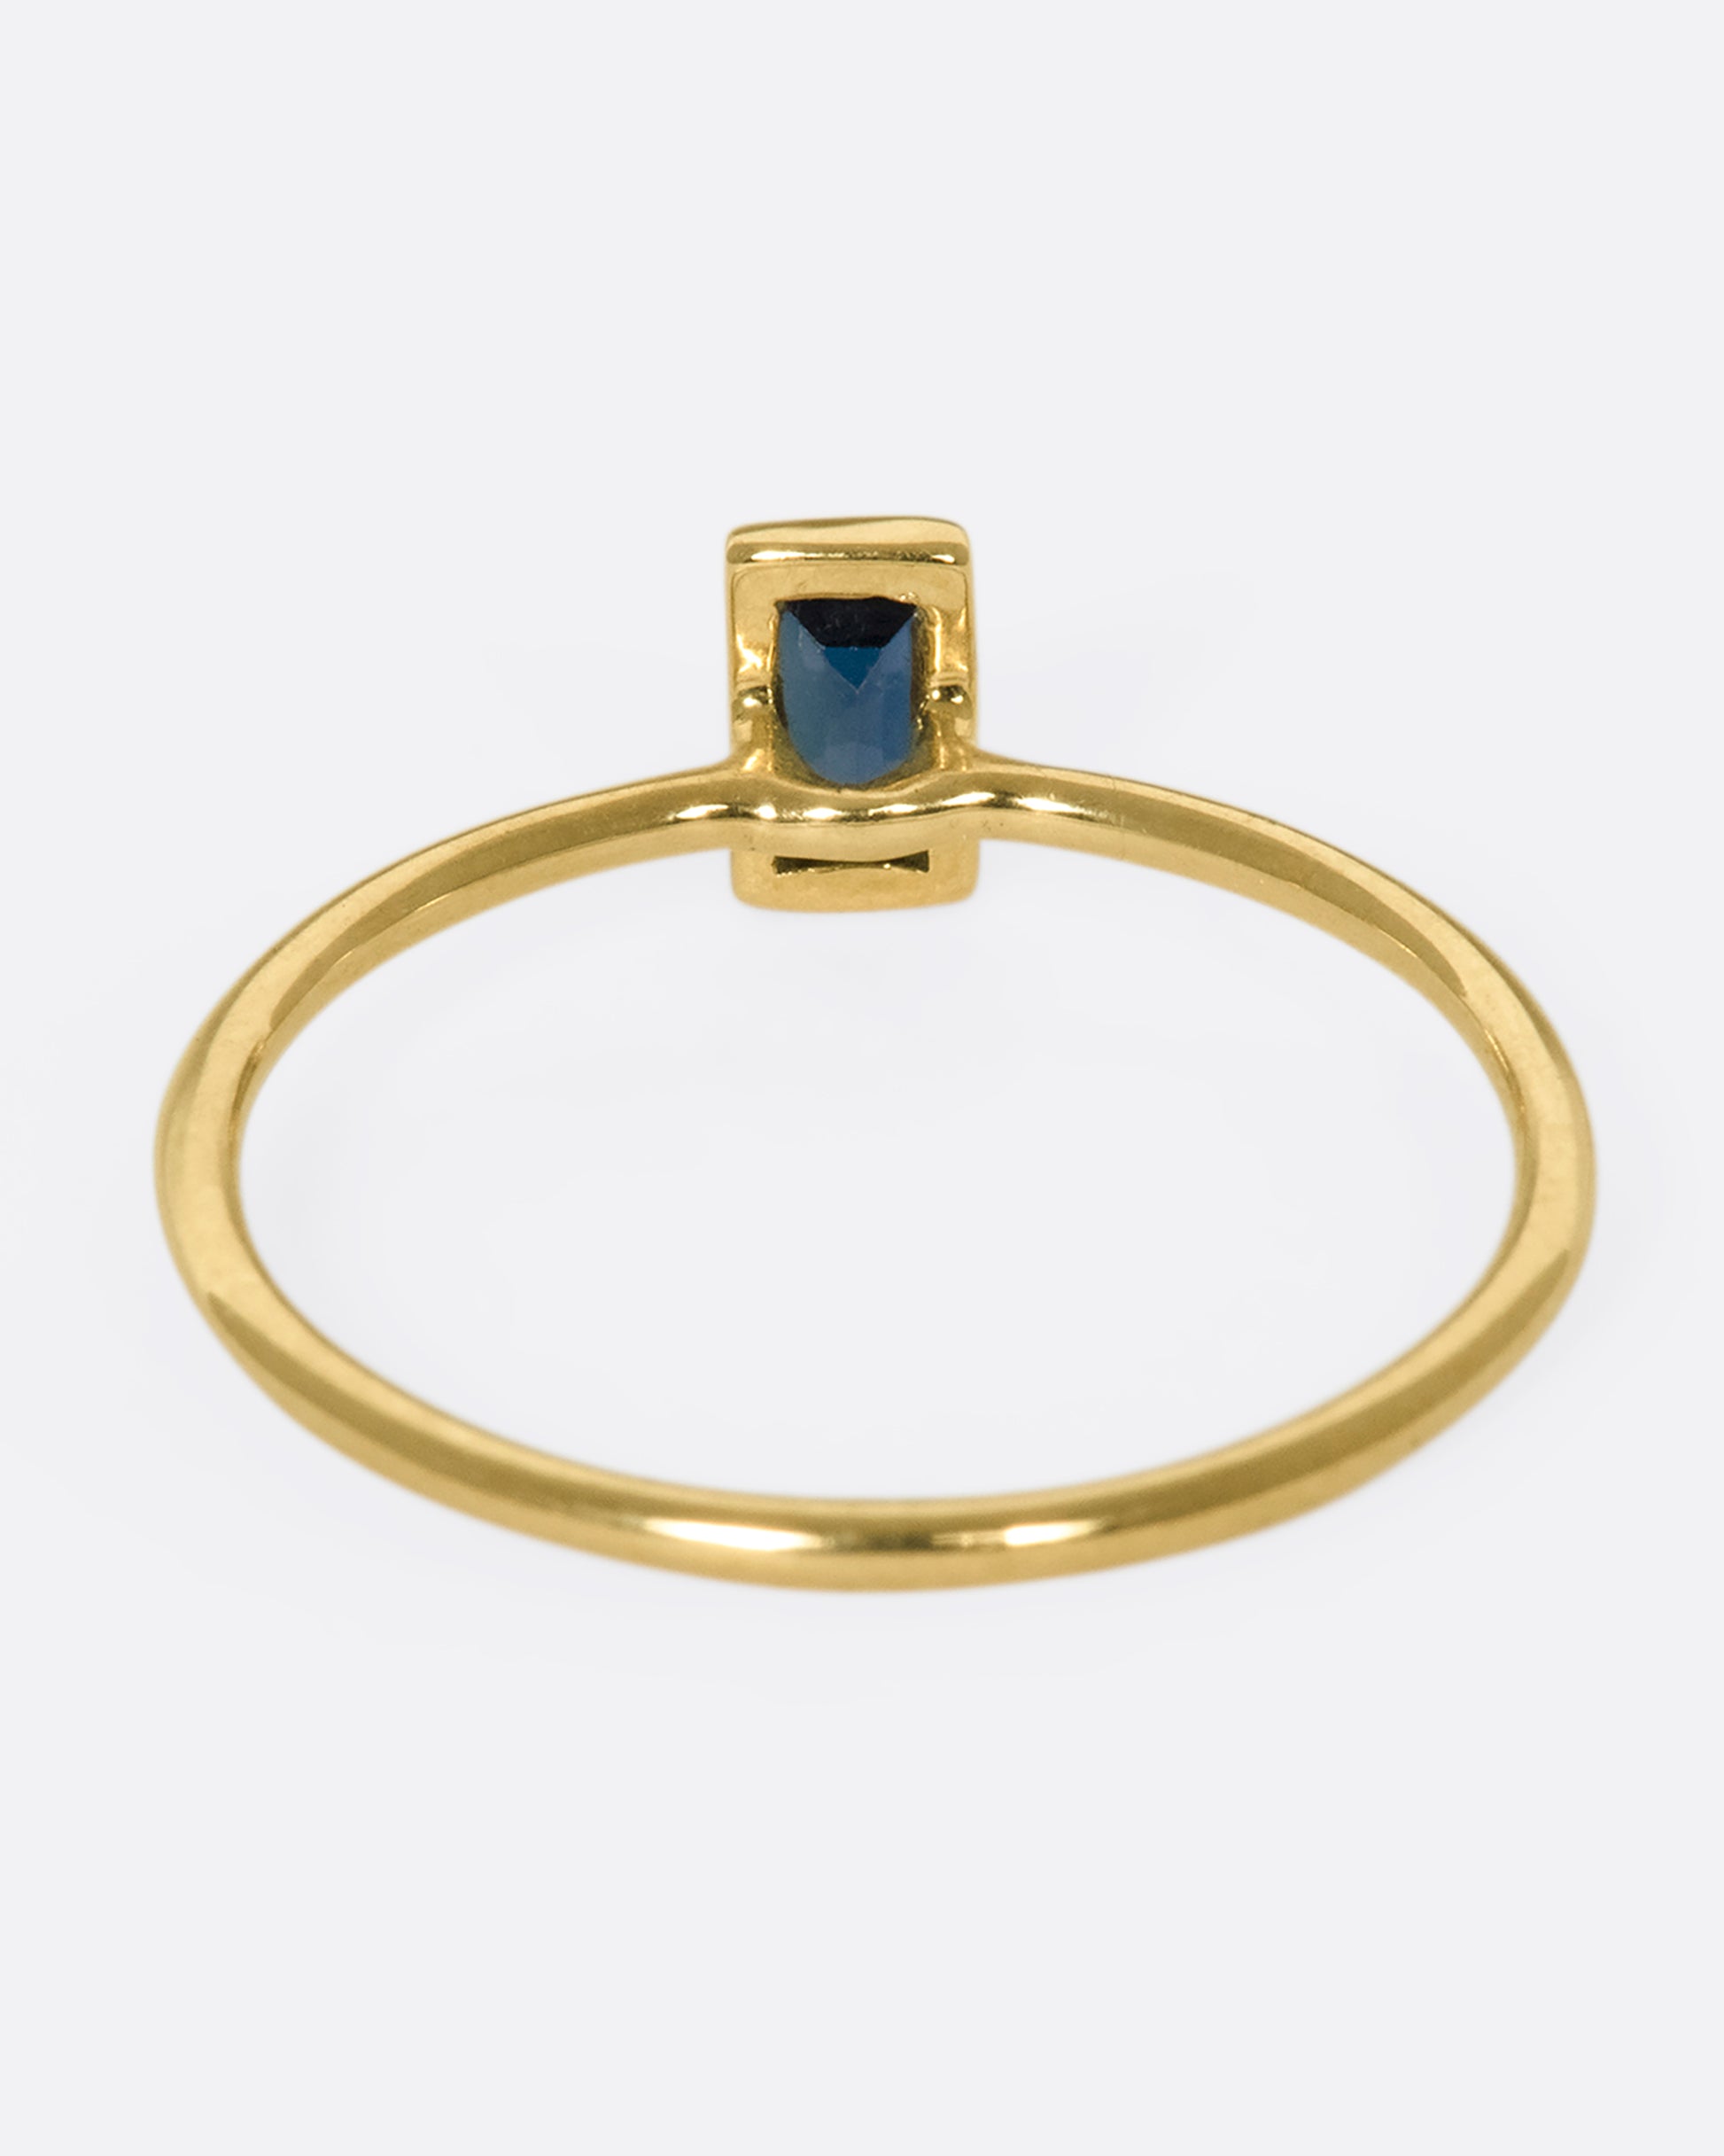 A 9k gold stacking ring with a vertical, bezel-set blue sapphire baguette